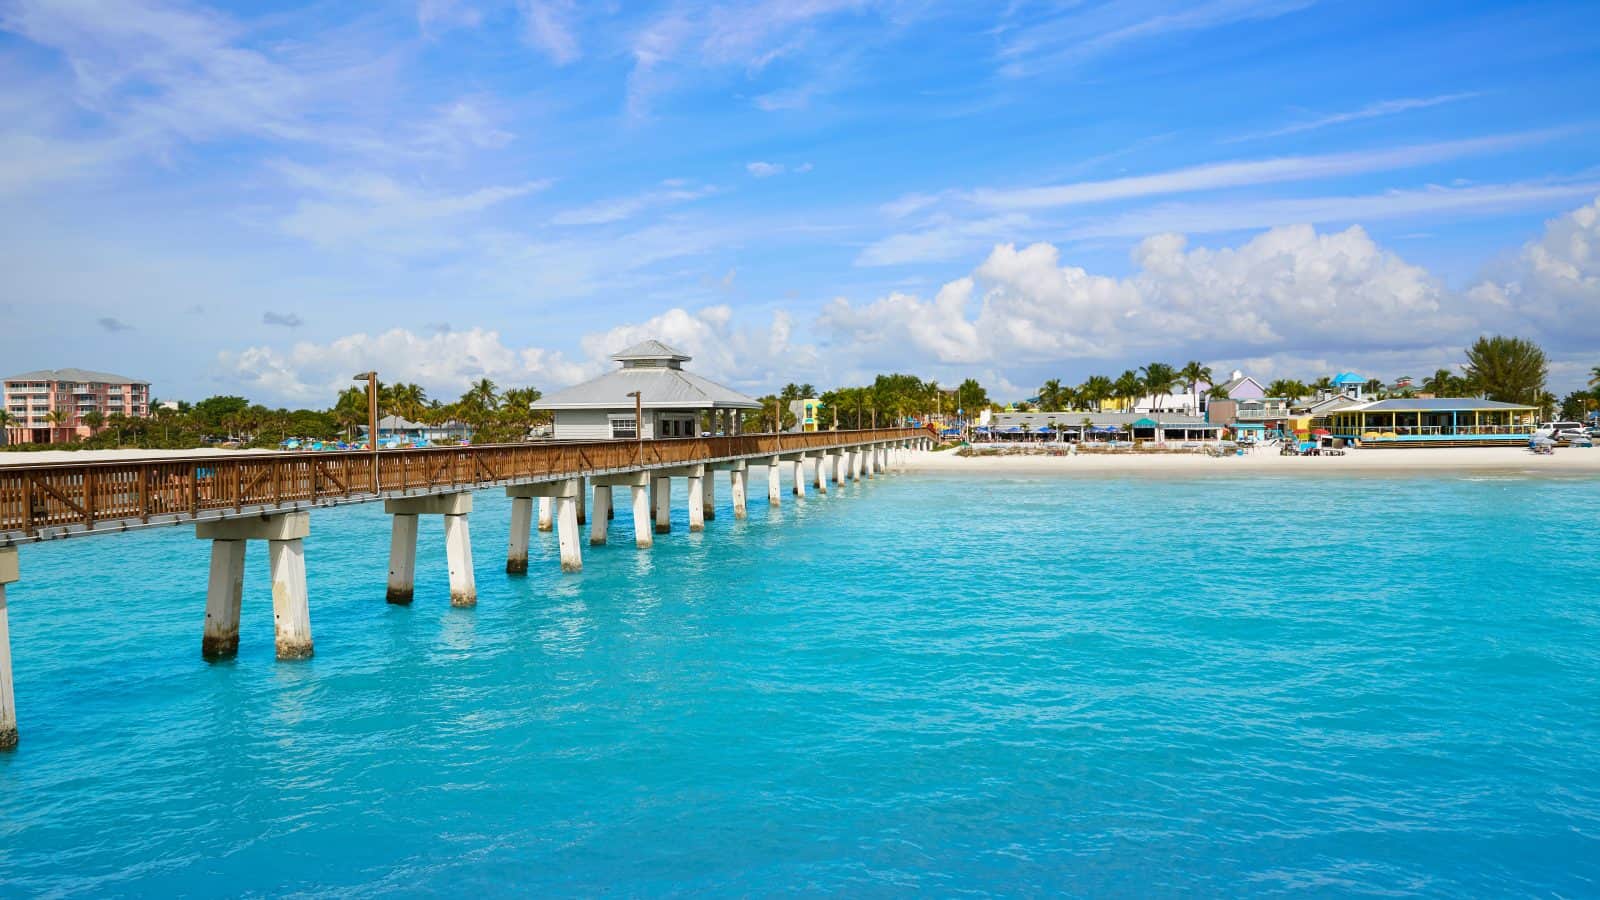 The Fort Myers Pier sits over clear turquoise waters.